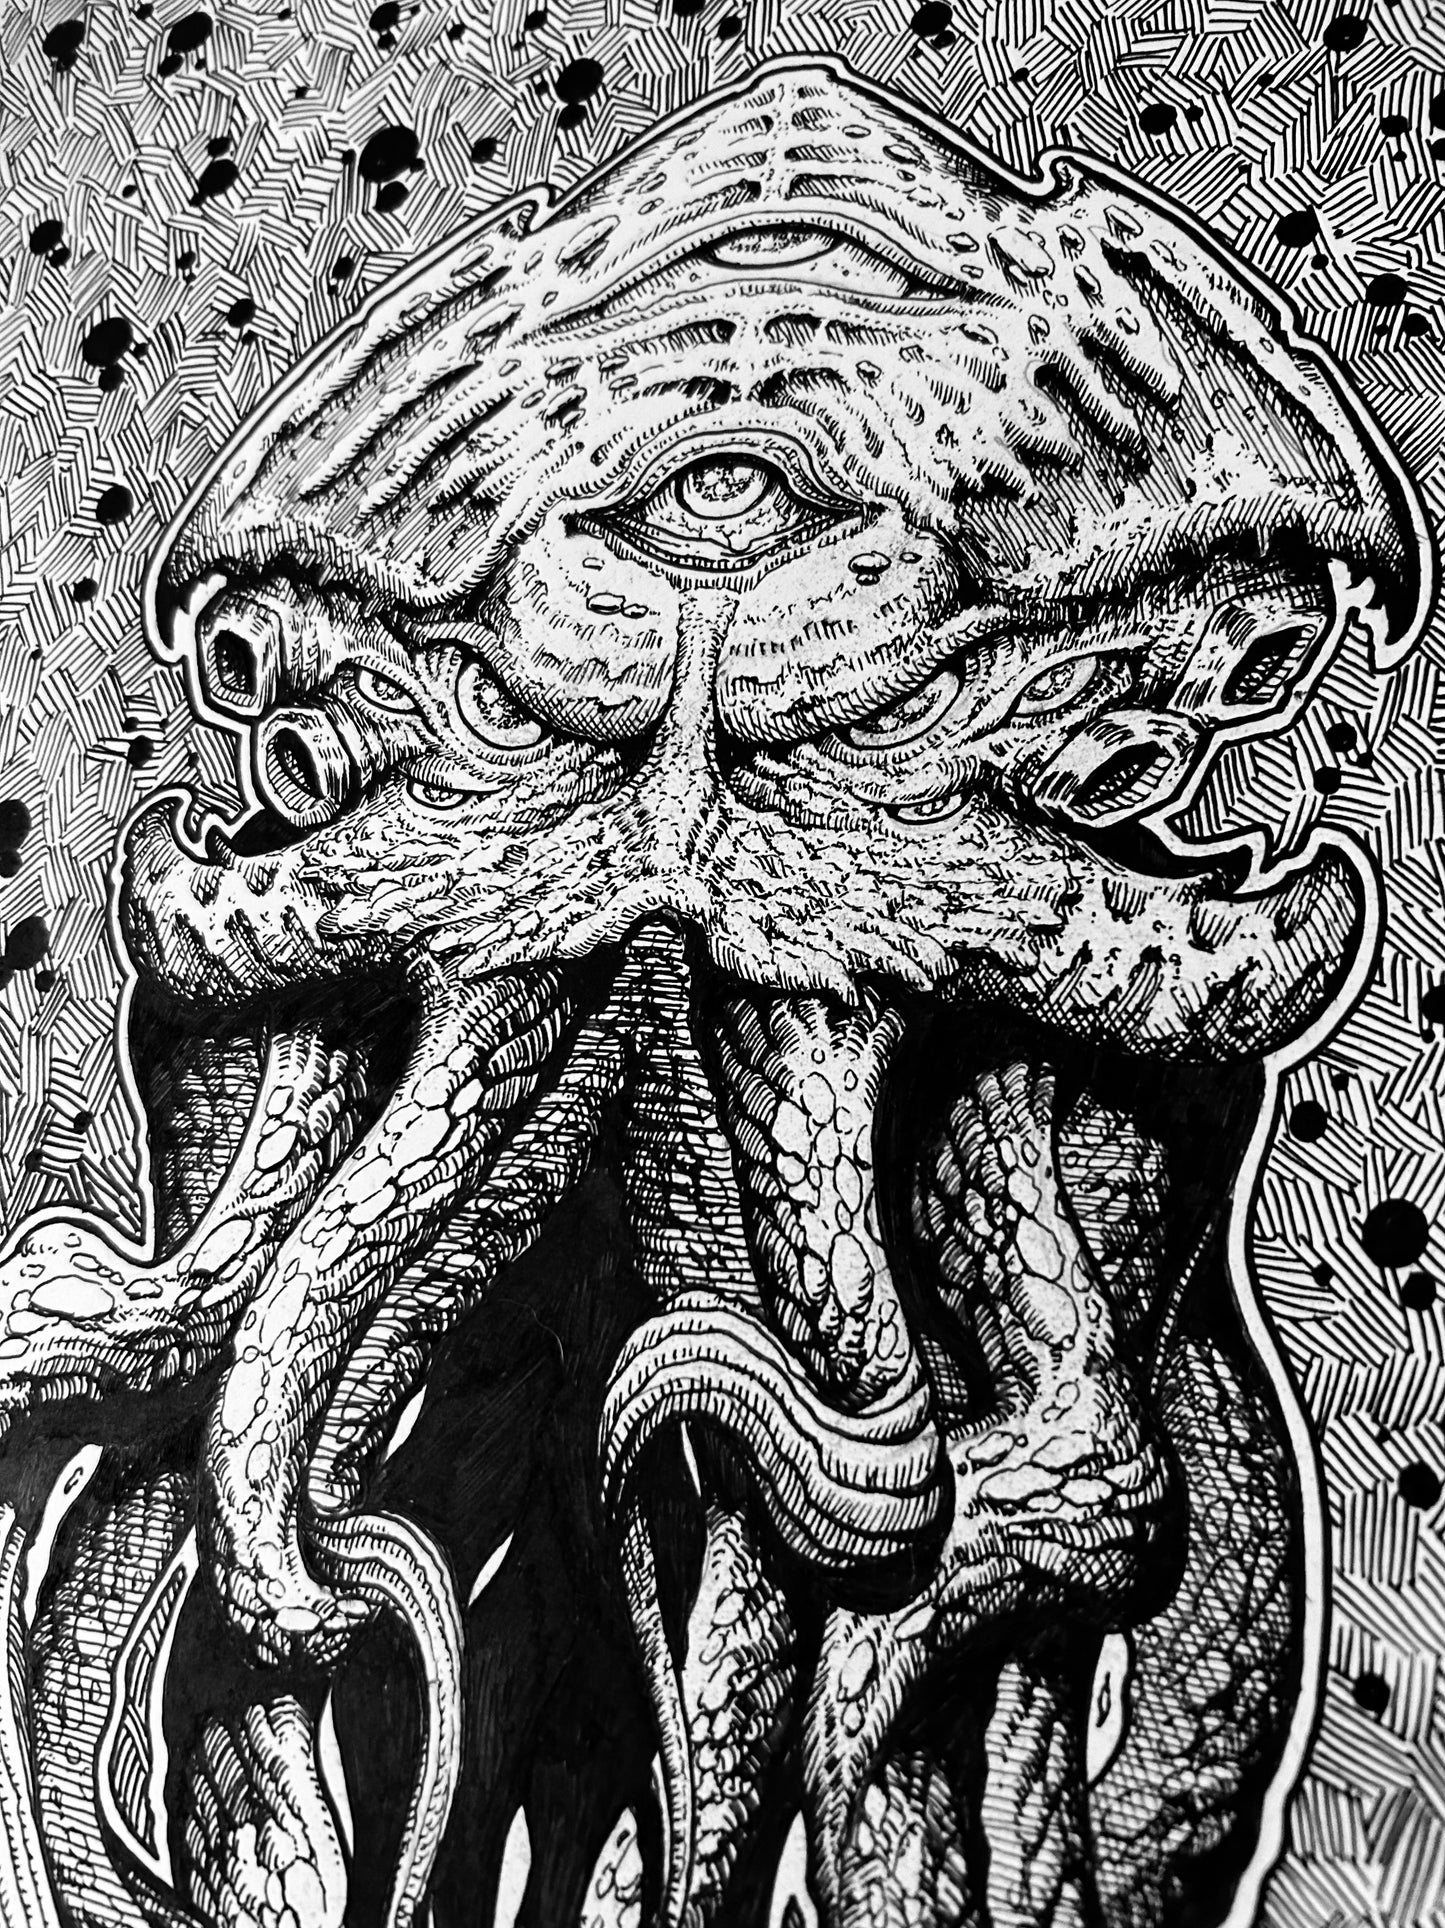 “Cthulhu Is Coming” 11in x 17in ORIGINAL